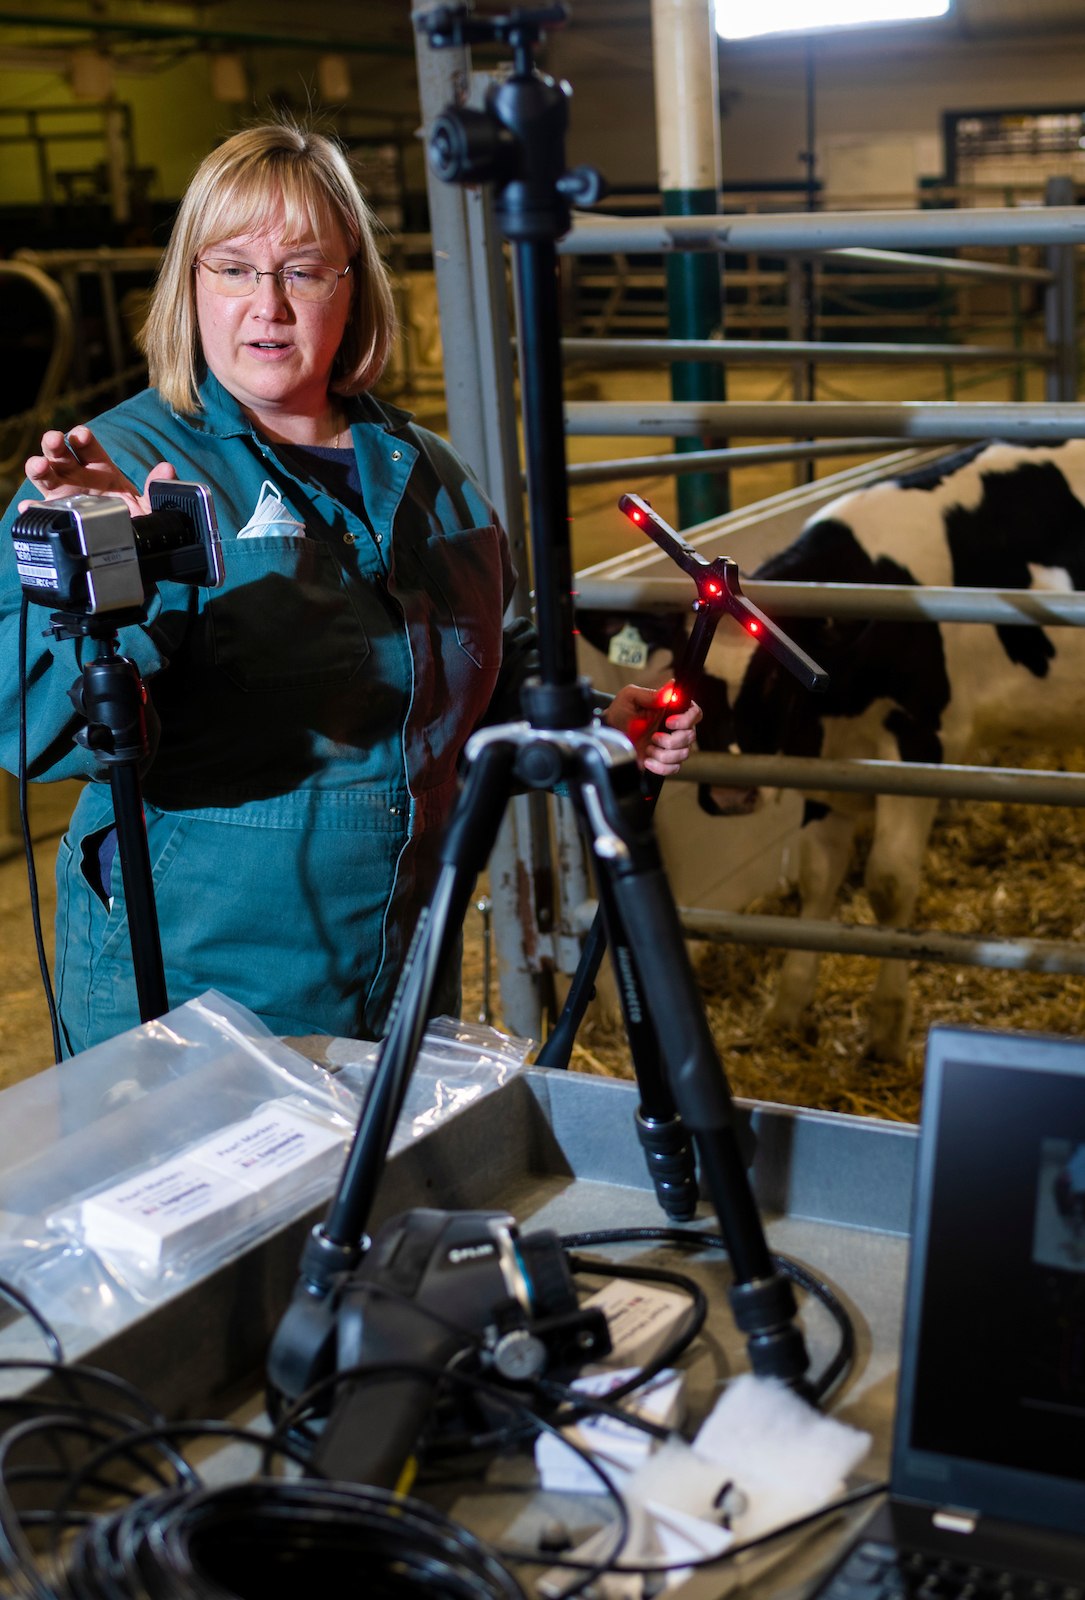 Researcher Clover Bench works at computer in a barn with cows